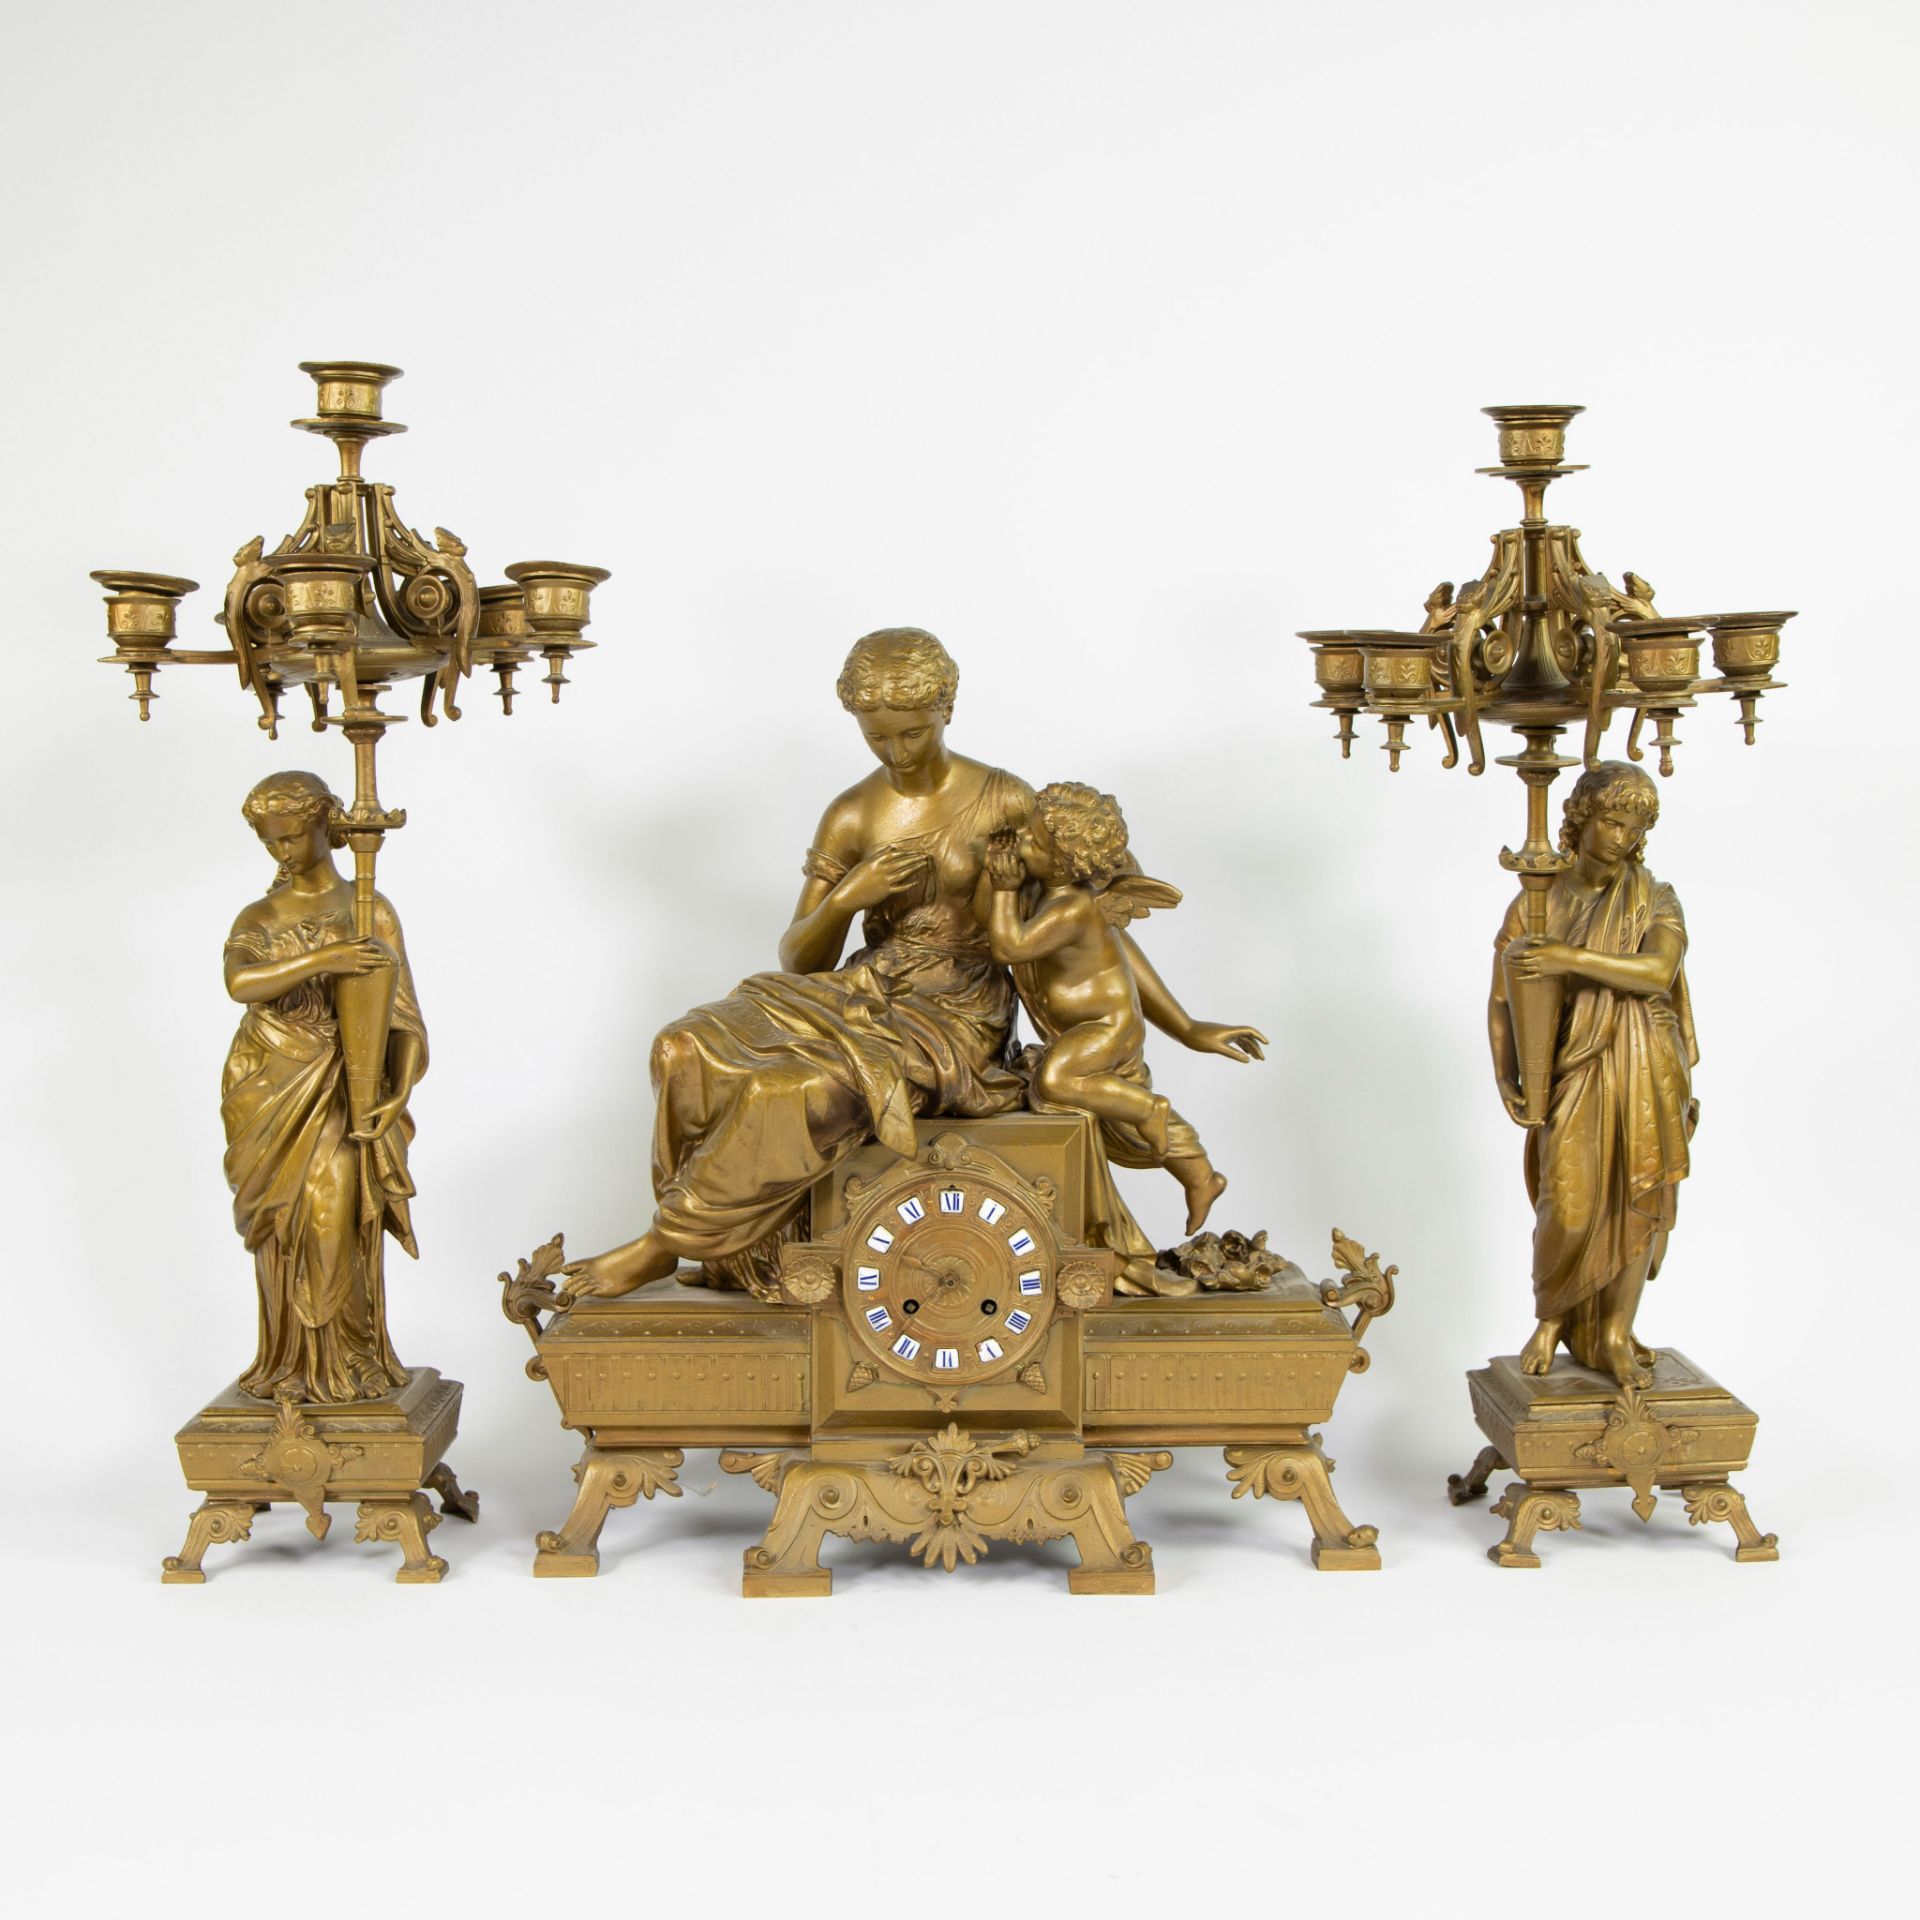 Imposing 19th century matte gold plated mantel clock decor seated woman with amaretto and 2 cariatid